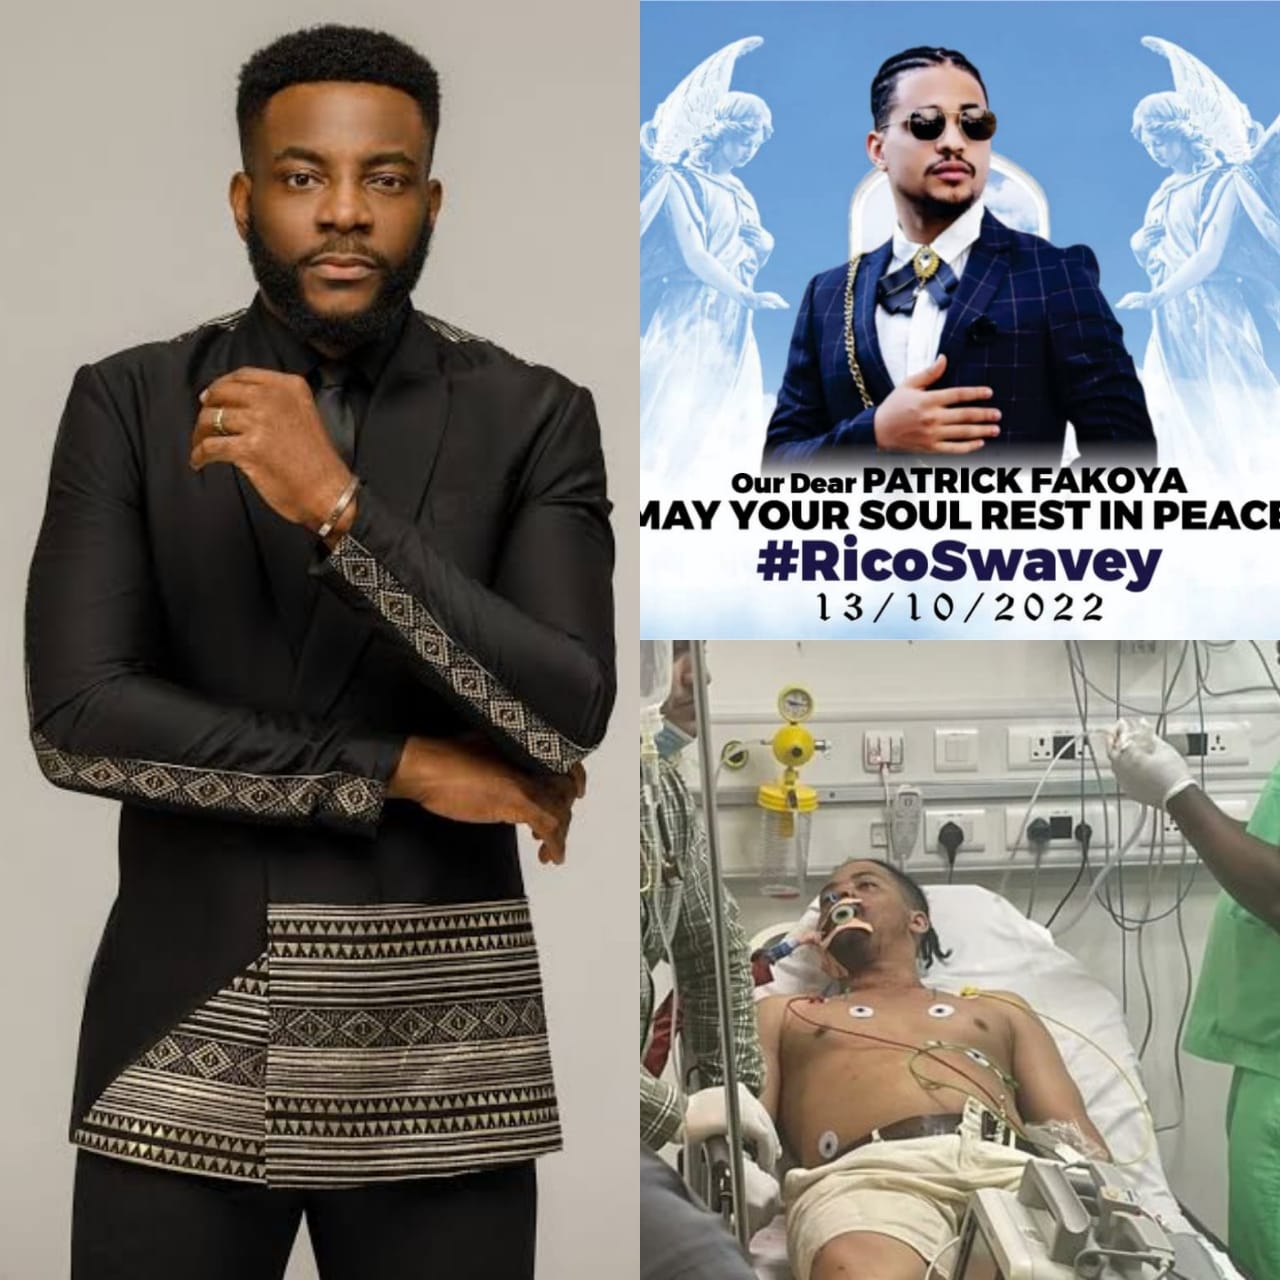 “He Was the Warmest Human Being”: Ebuka pens down emotional tributes for Rico Swavey